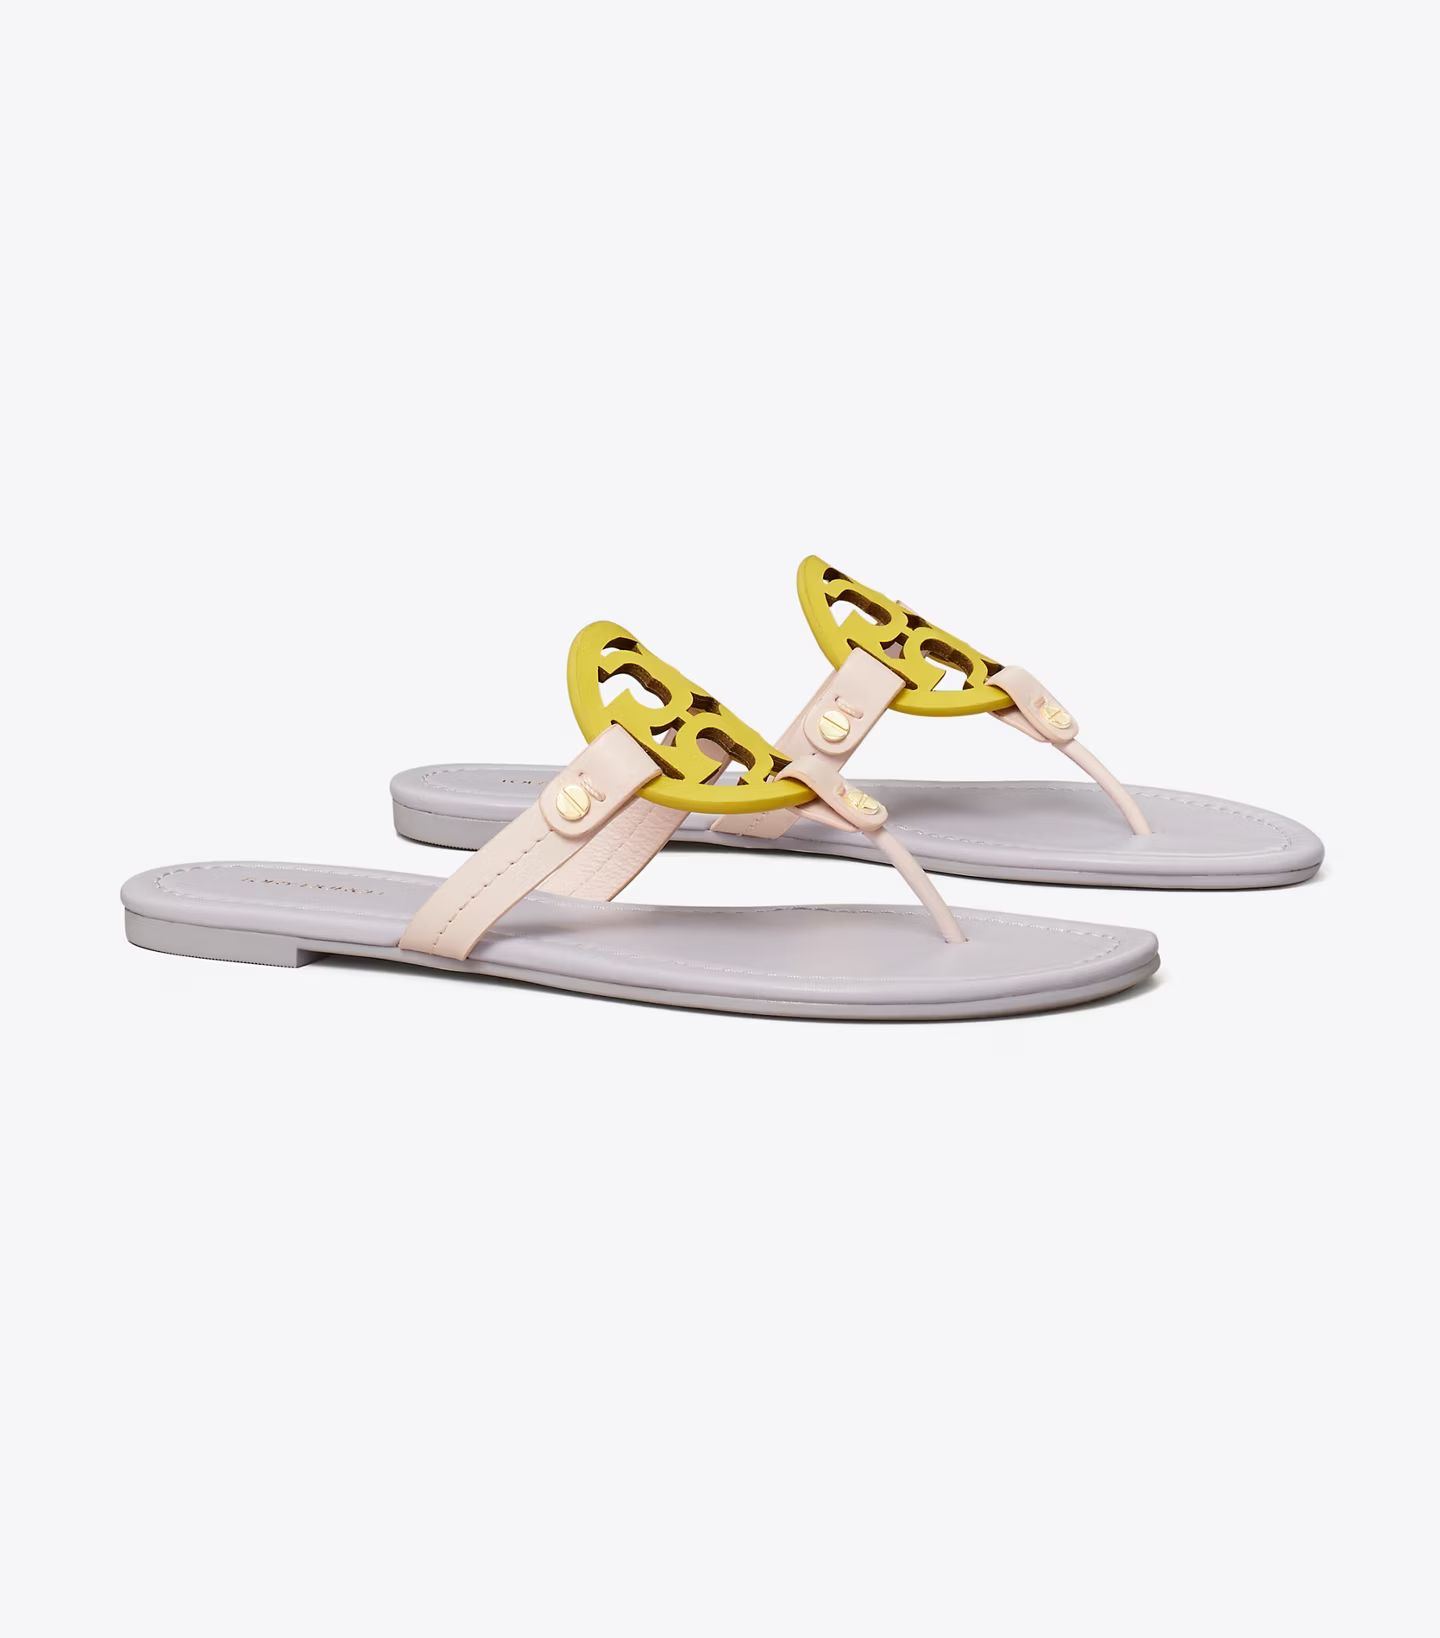 MILLER SANDAL, LEATHER | Tory Burch (US)